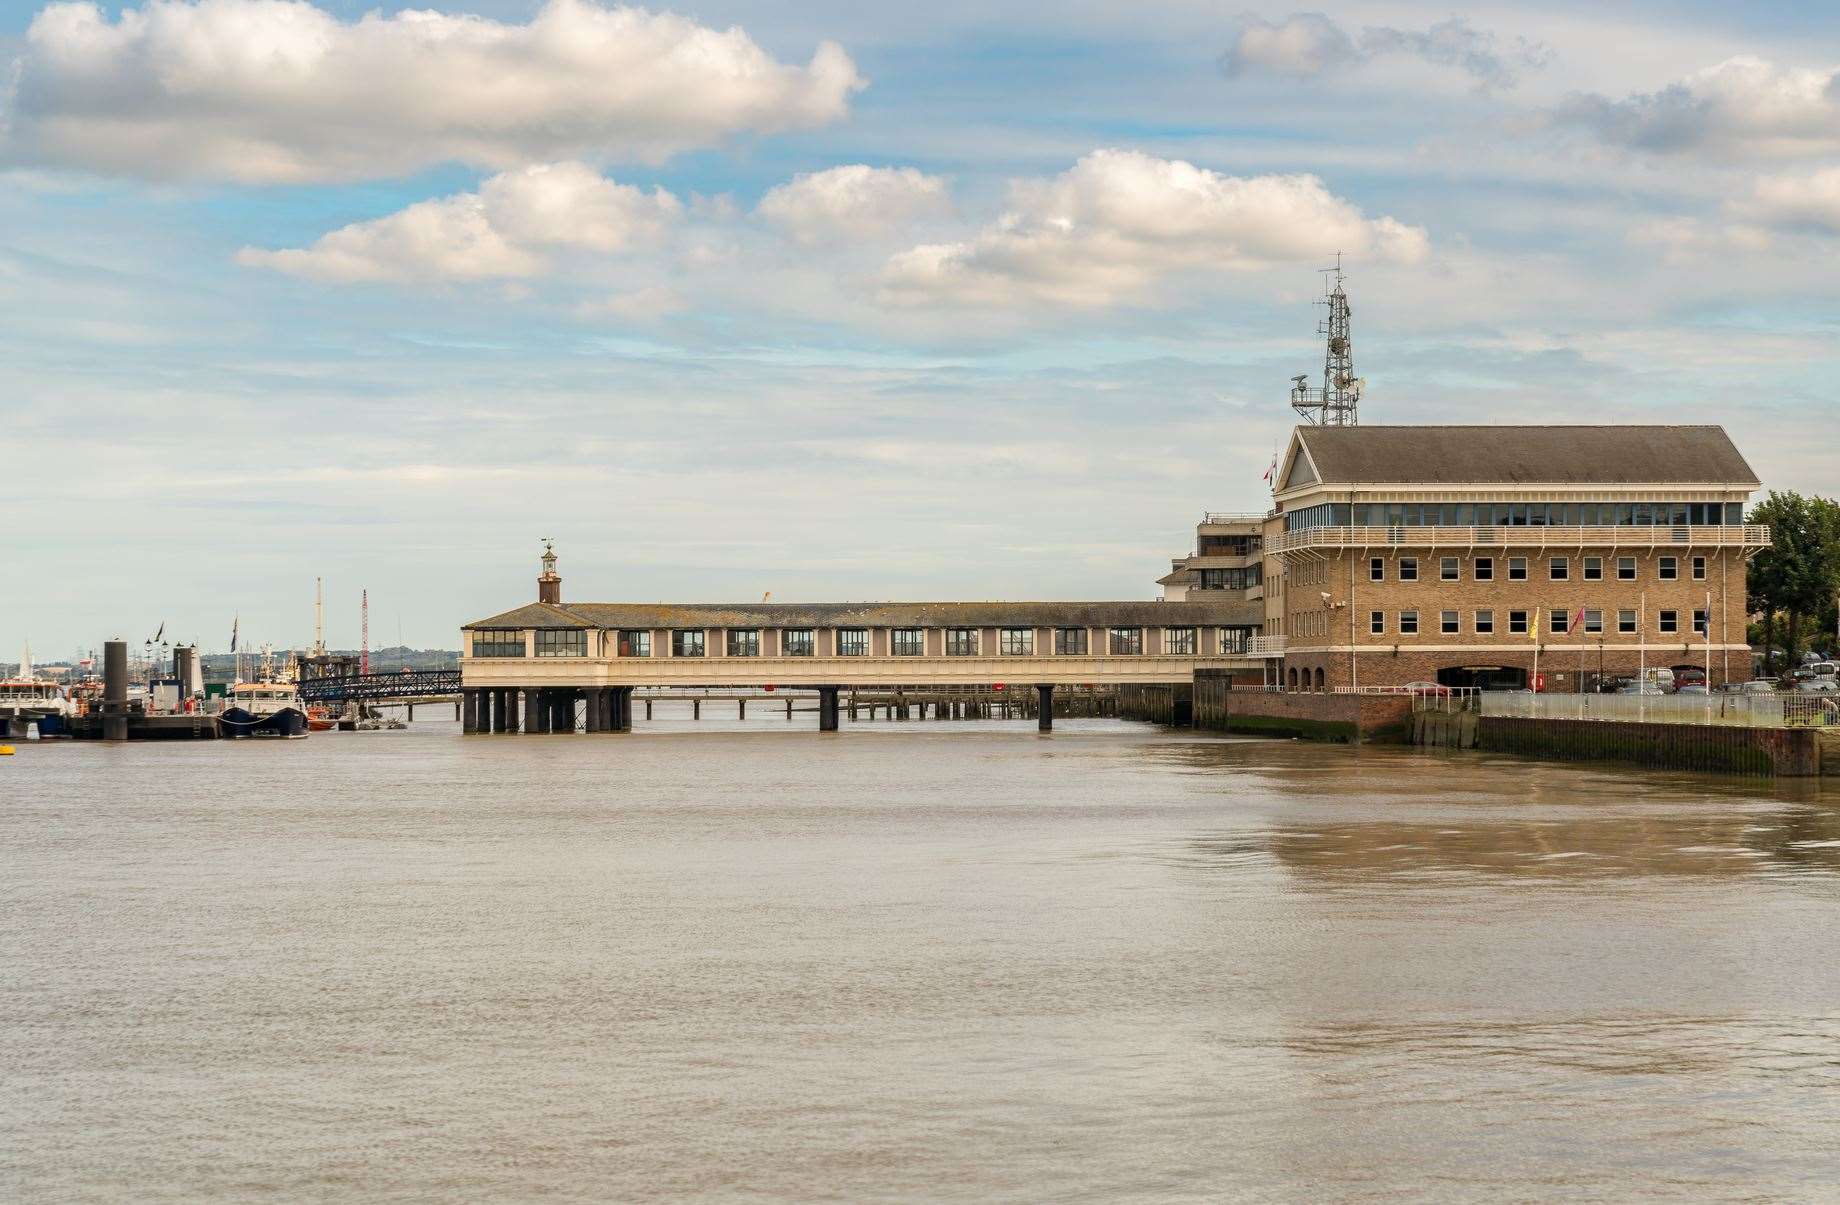 The River Thames and the Royal Terrace Pier in Gravesend